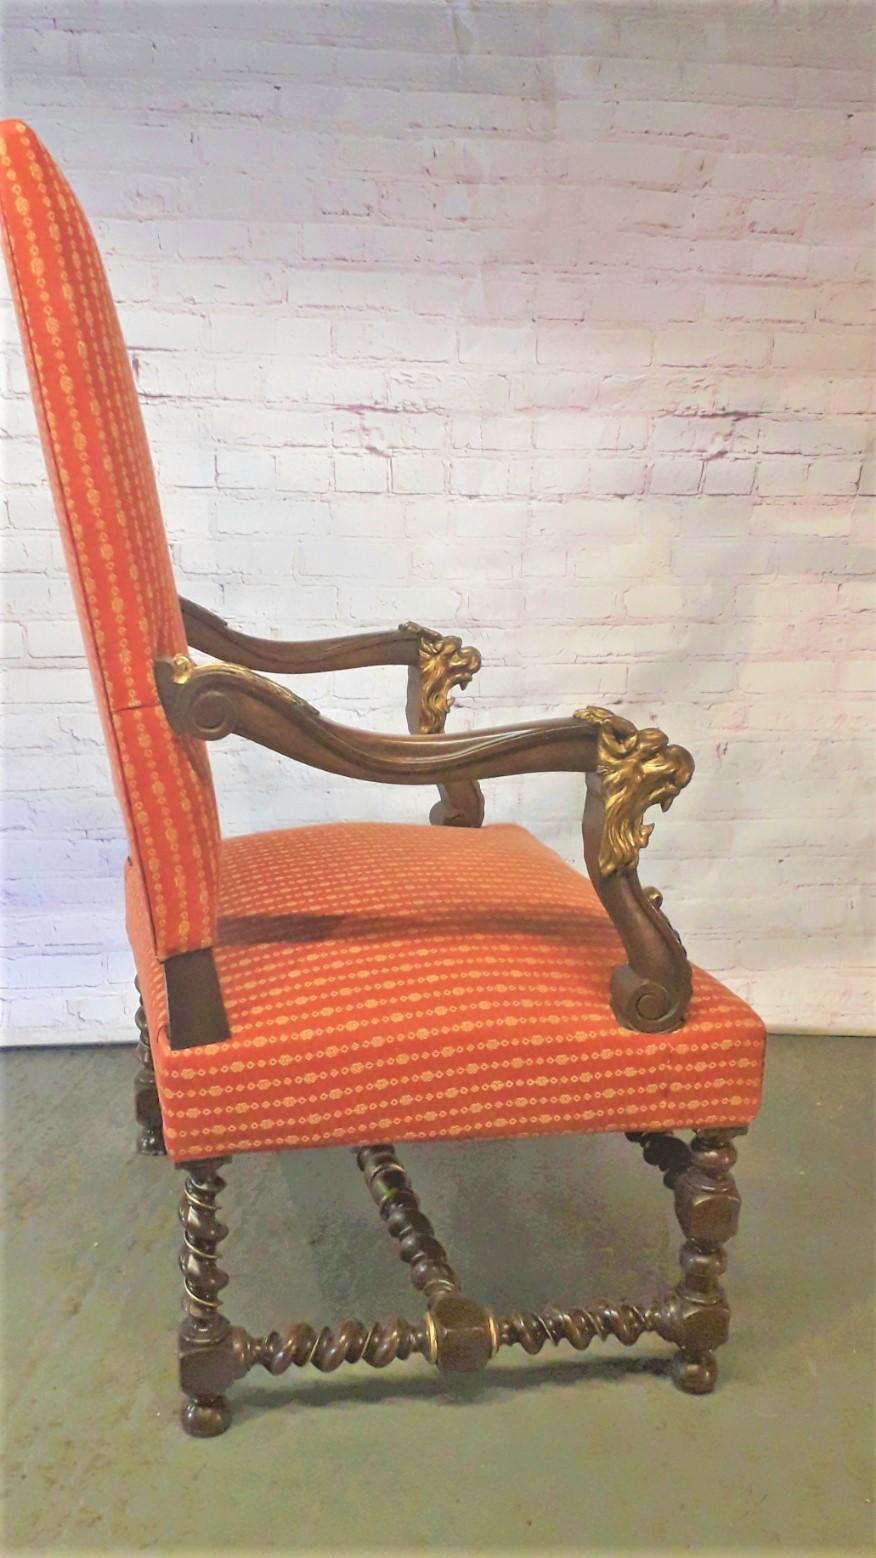 A fabulous pair of parcel gilt walnut armchairs with rare double barley twist turnings, the open scrolled arms carved with lion mask heads set on arms with gilded brackets, the bun feet supported by turned legs with superb gilded motifs.

We can